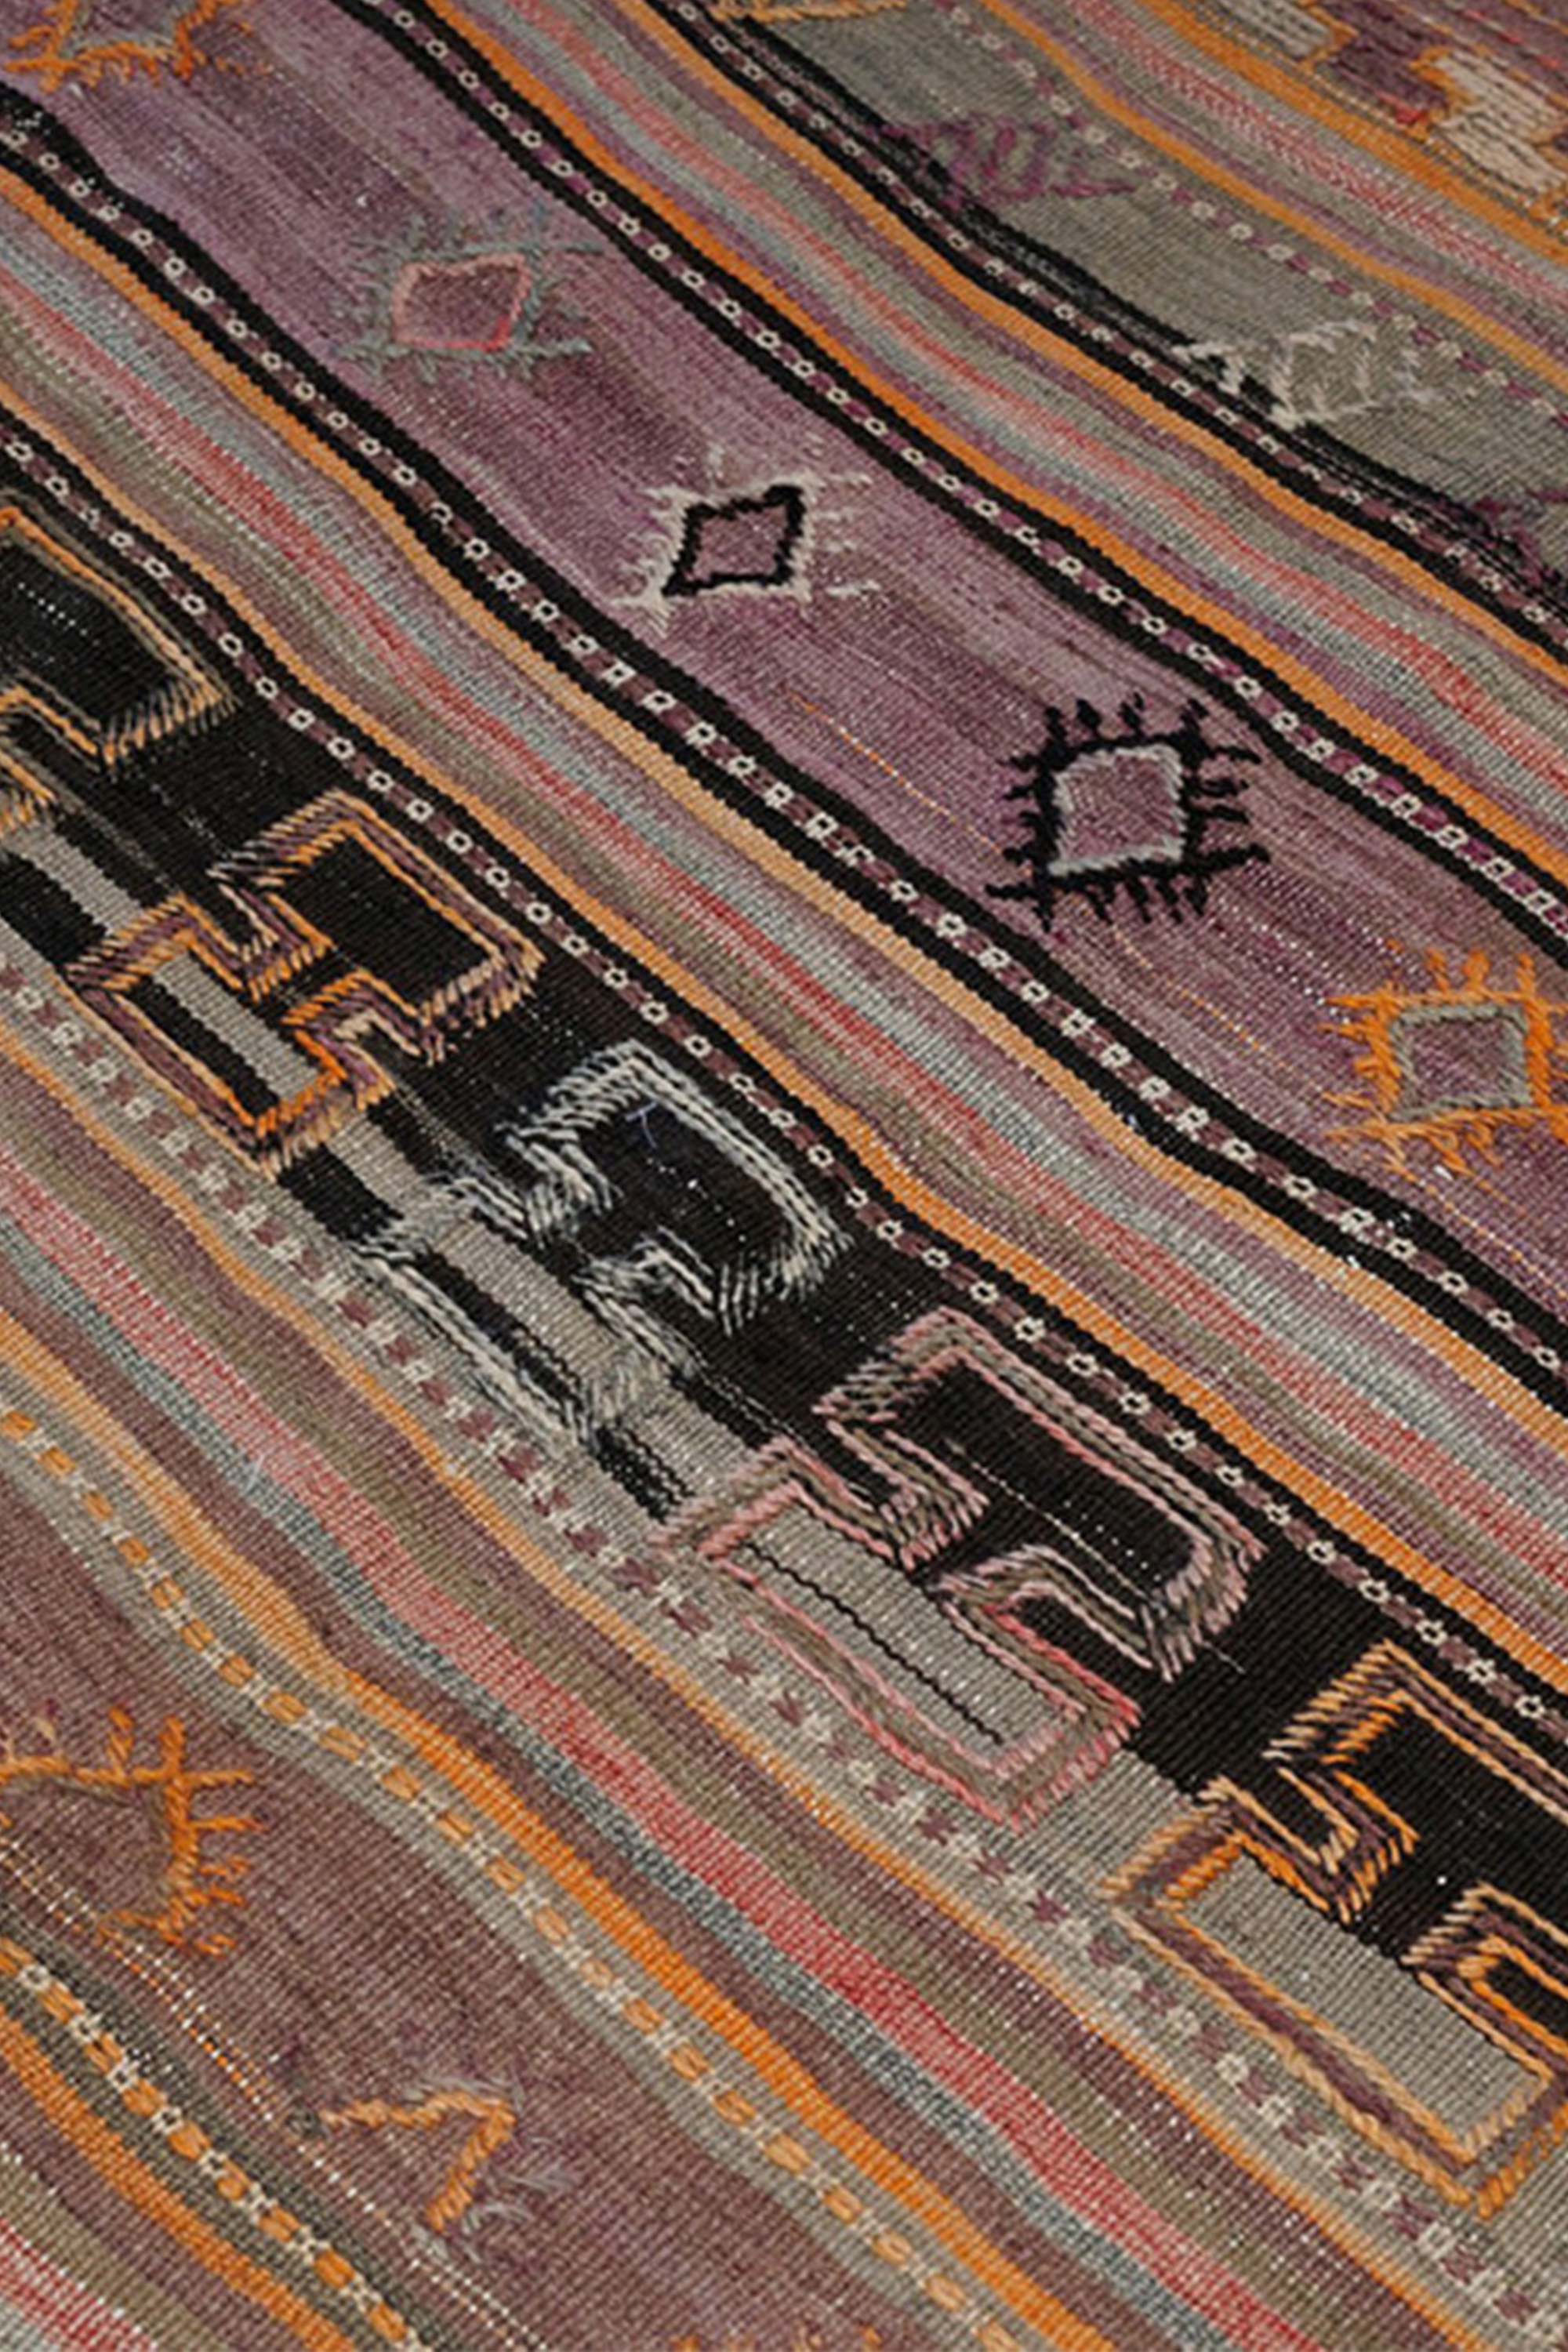 authentic persian runner with tribal geometric design in orange, purple, black, and green